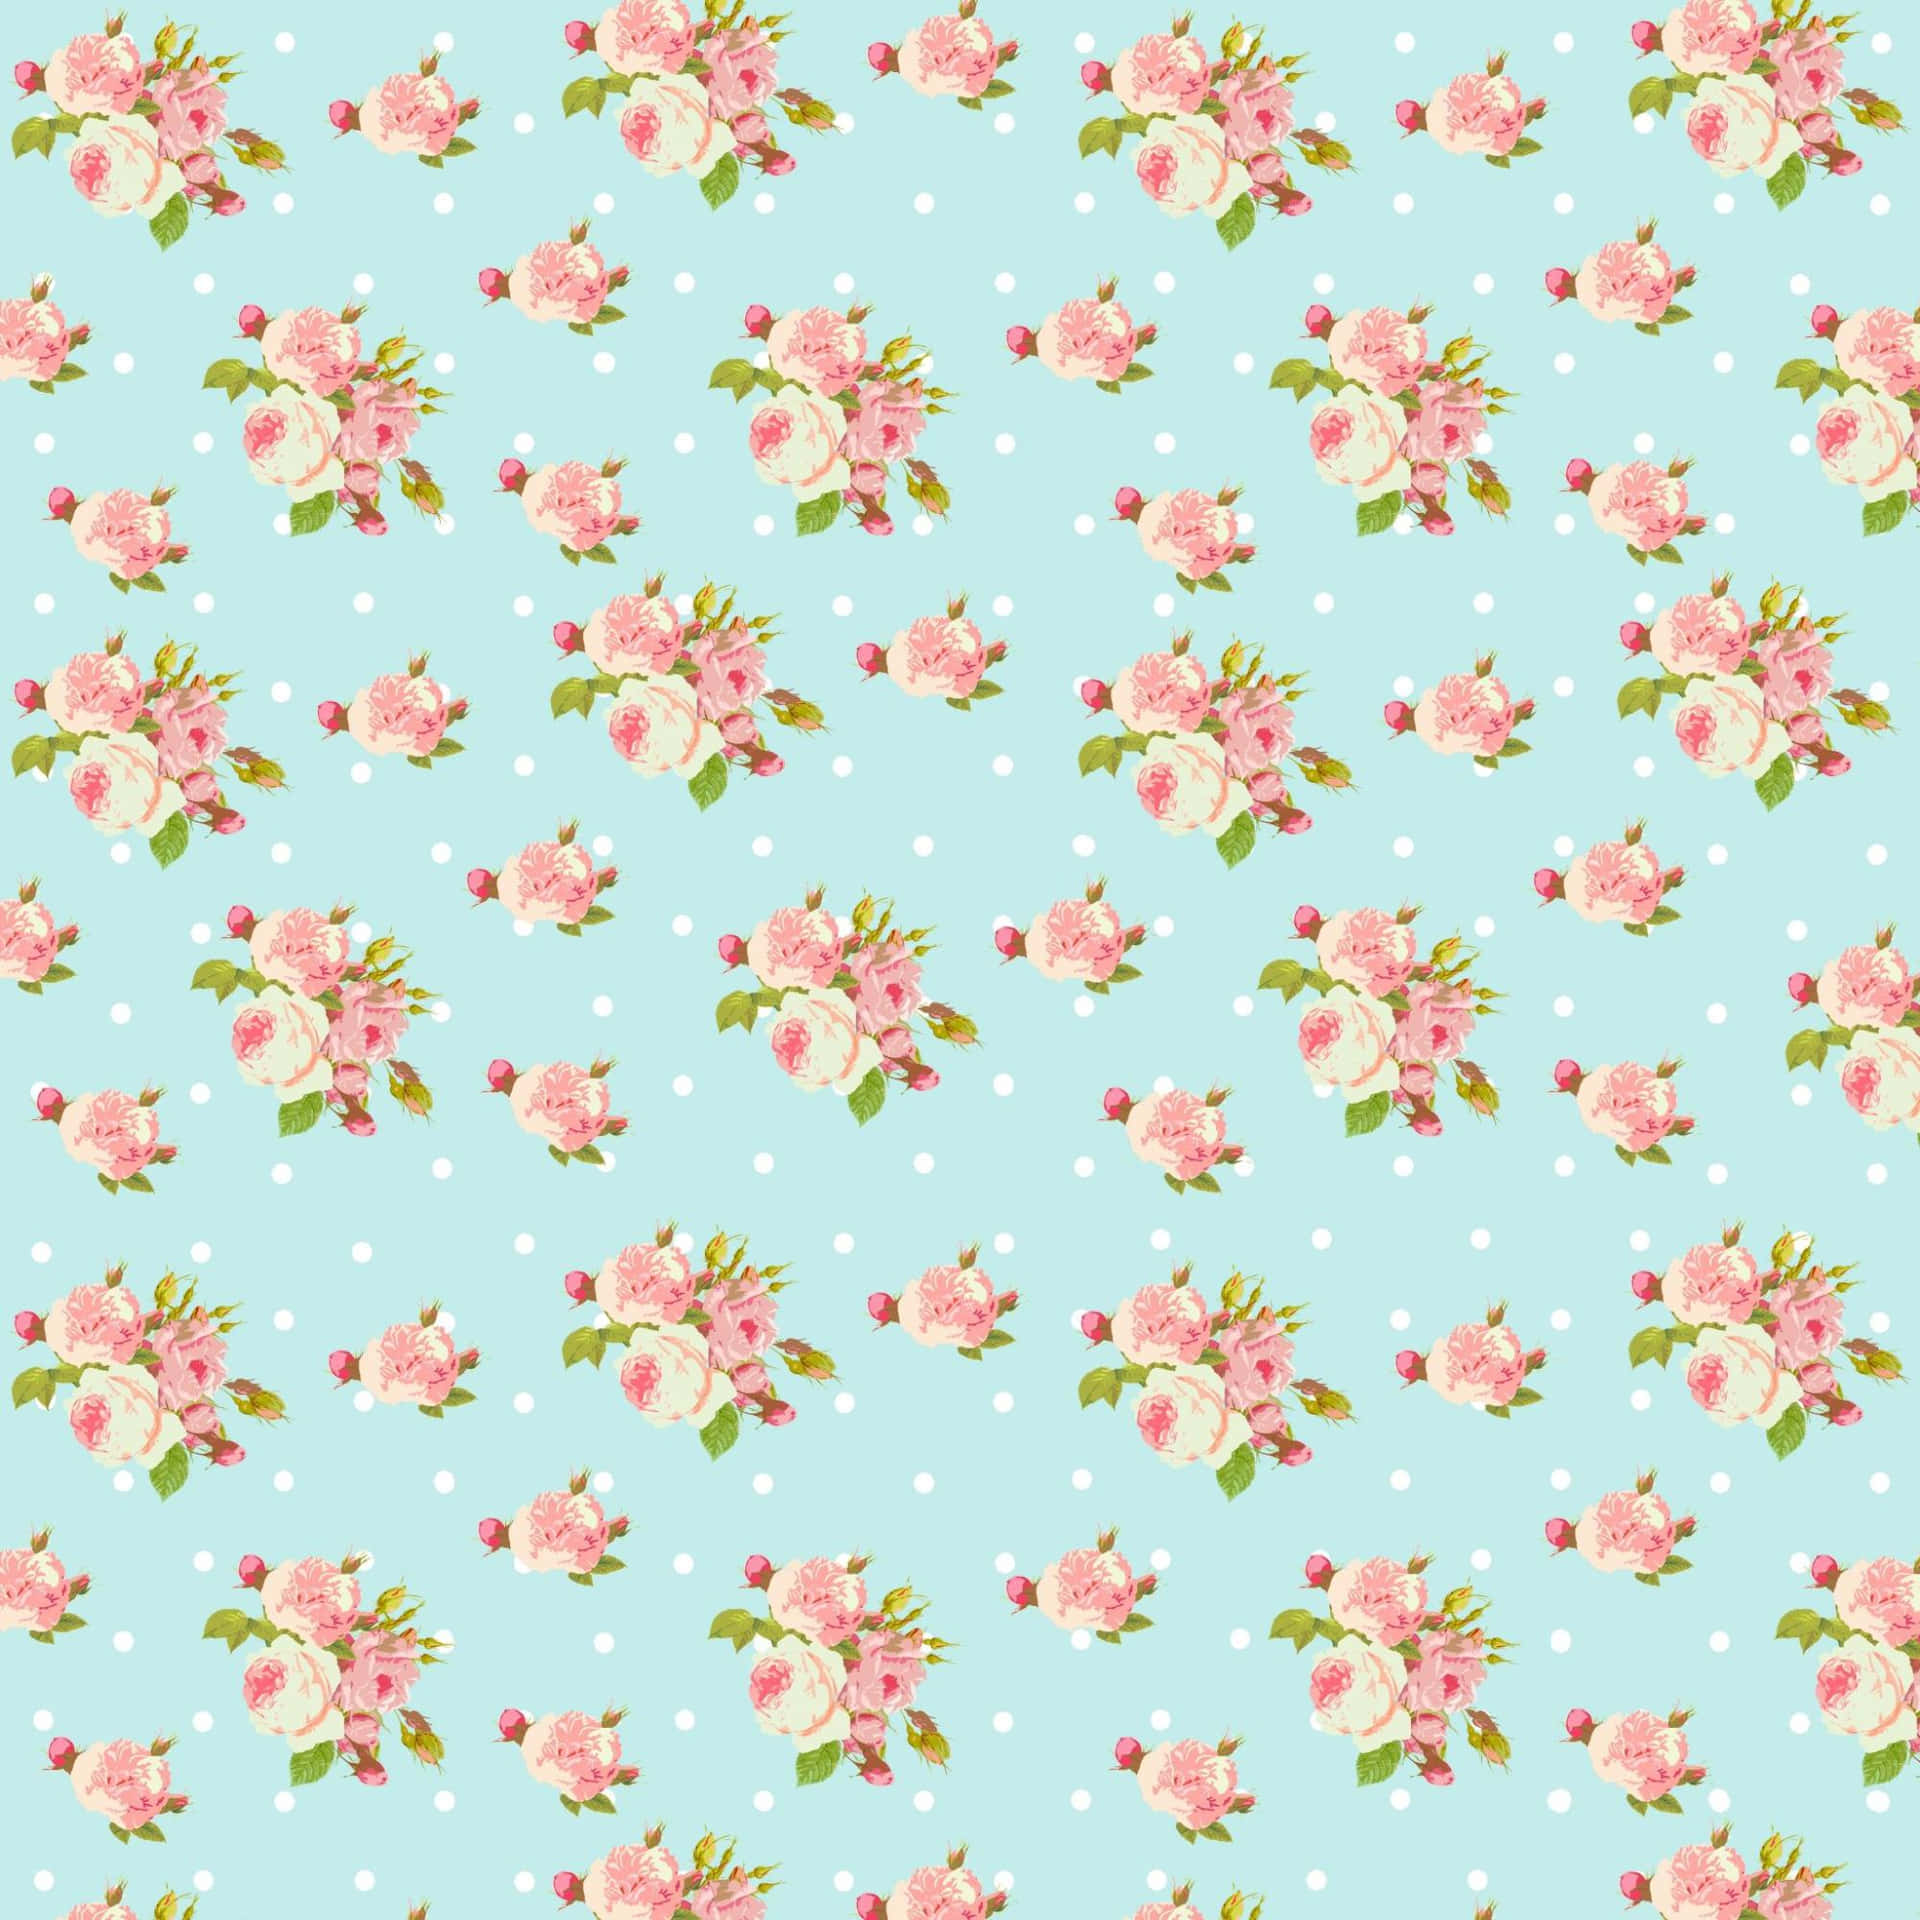 Background With Chic Flower Pattern Wallpaper